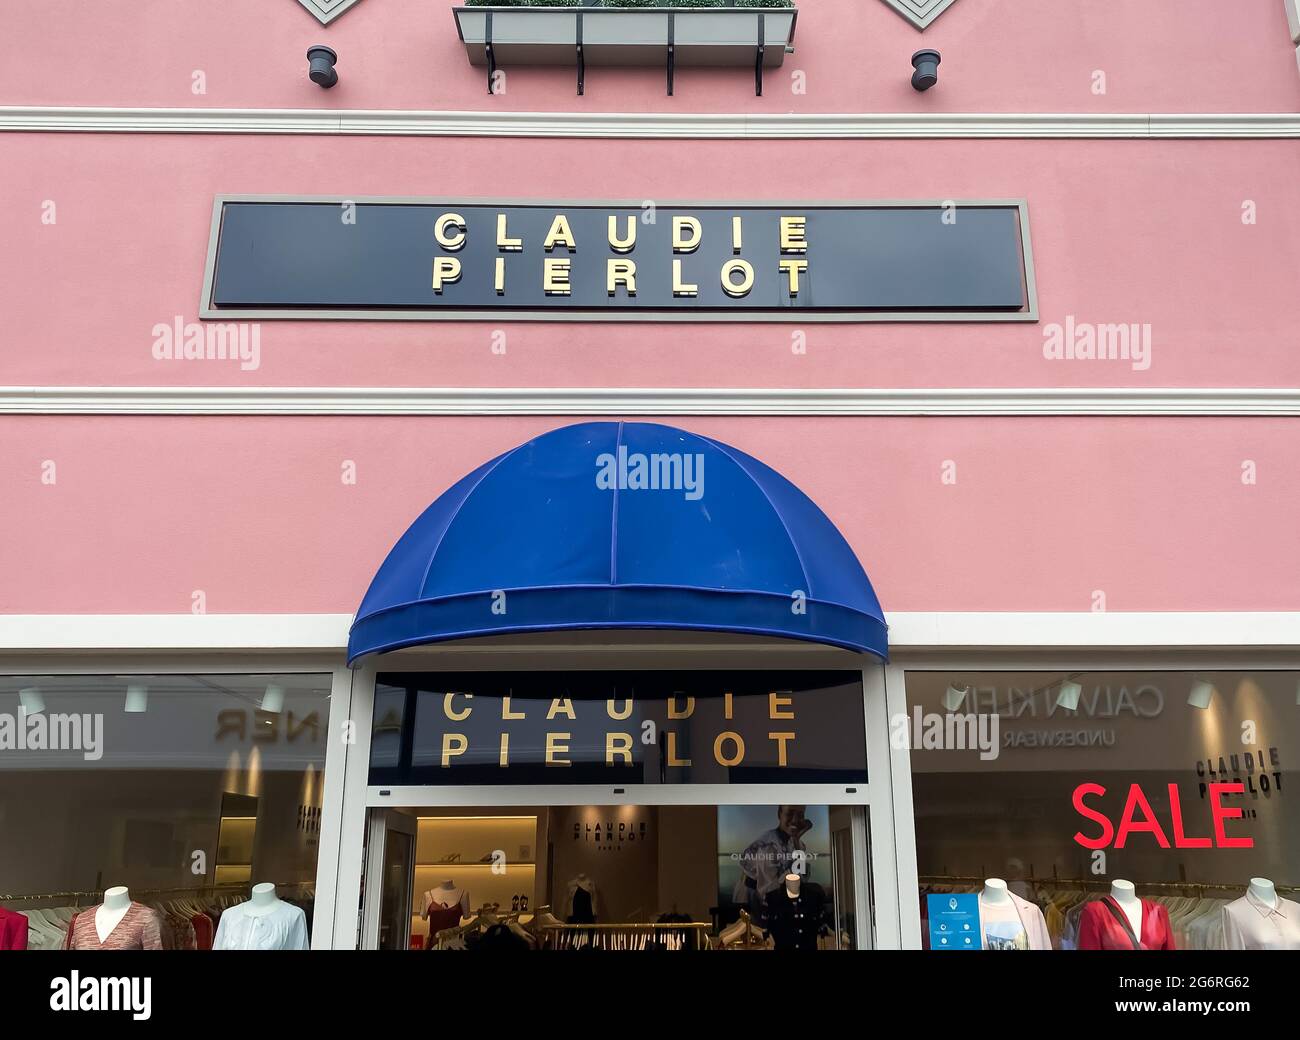 Roermond, Netherlands - July 1. 2021: View on store facade with logo  lettering of claudie pierlot fashion label Stock Photo - Alamy